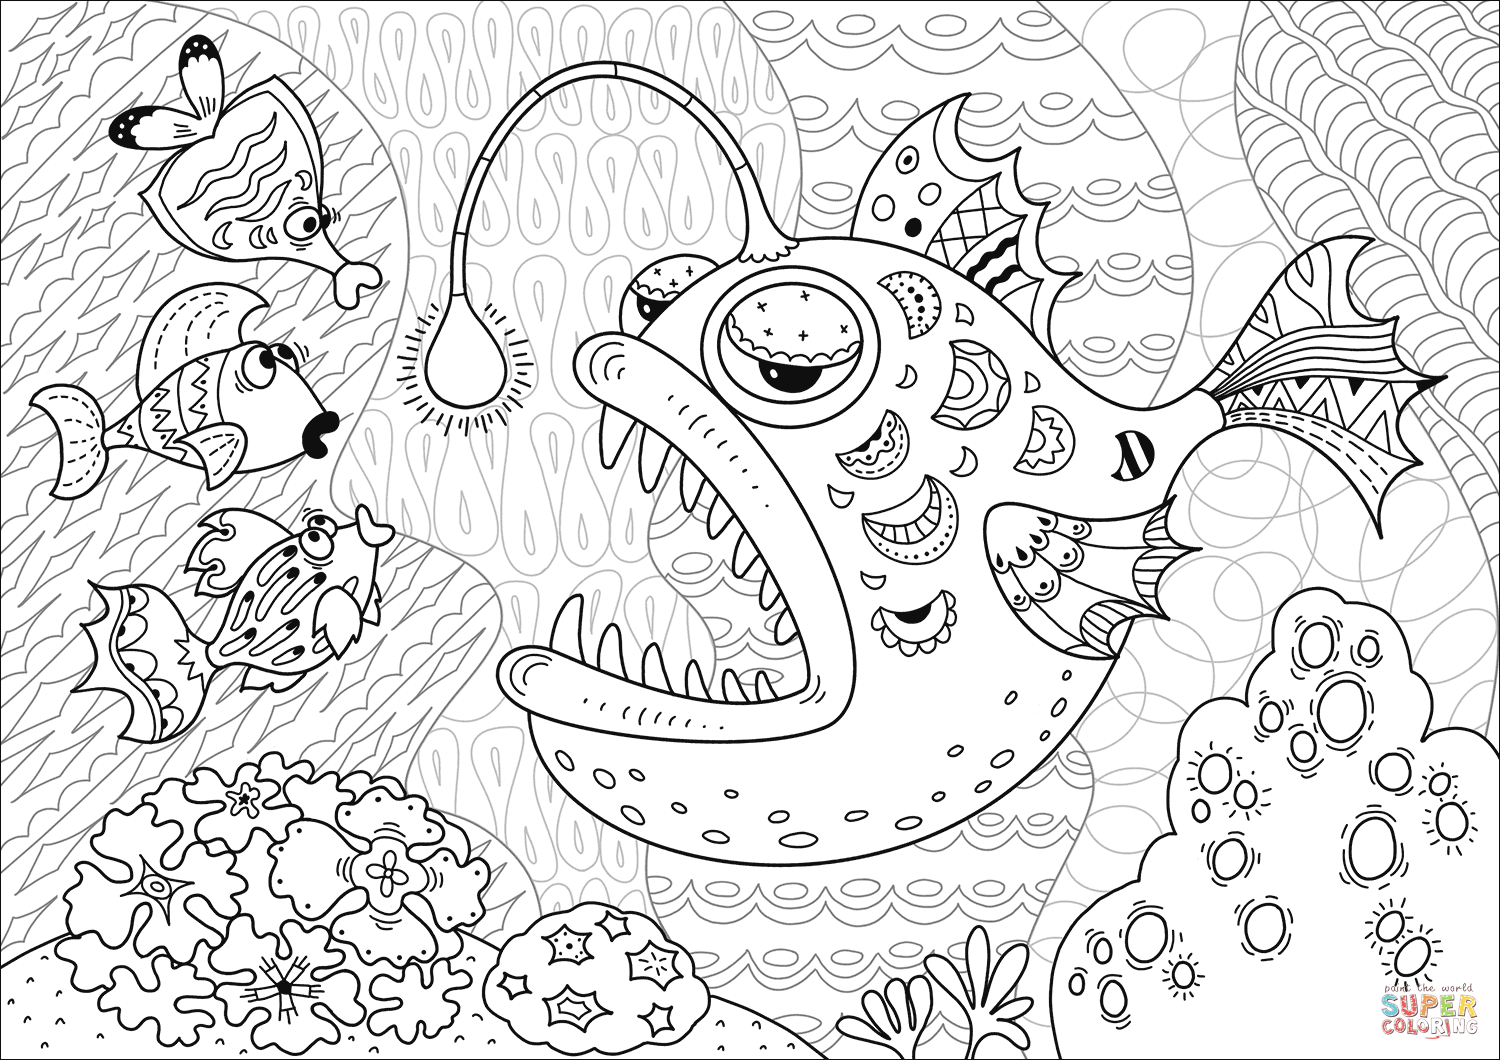 Anglerfish coloring page | Free Printable Coloring Pages